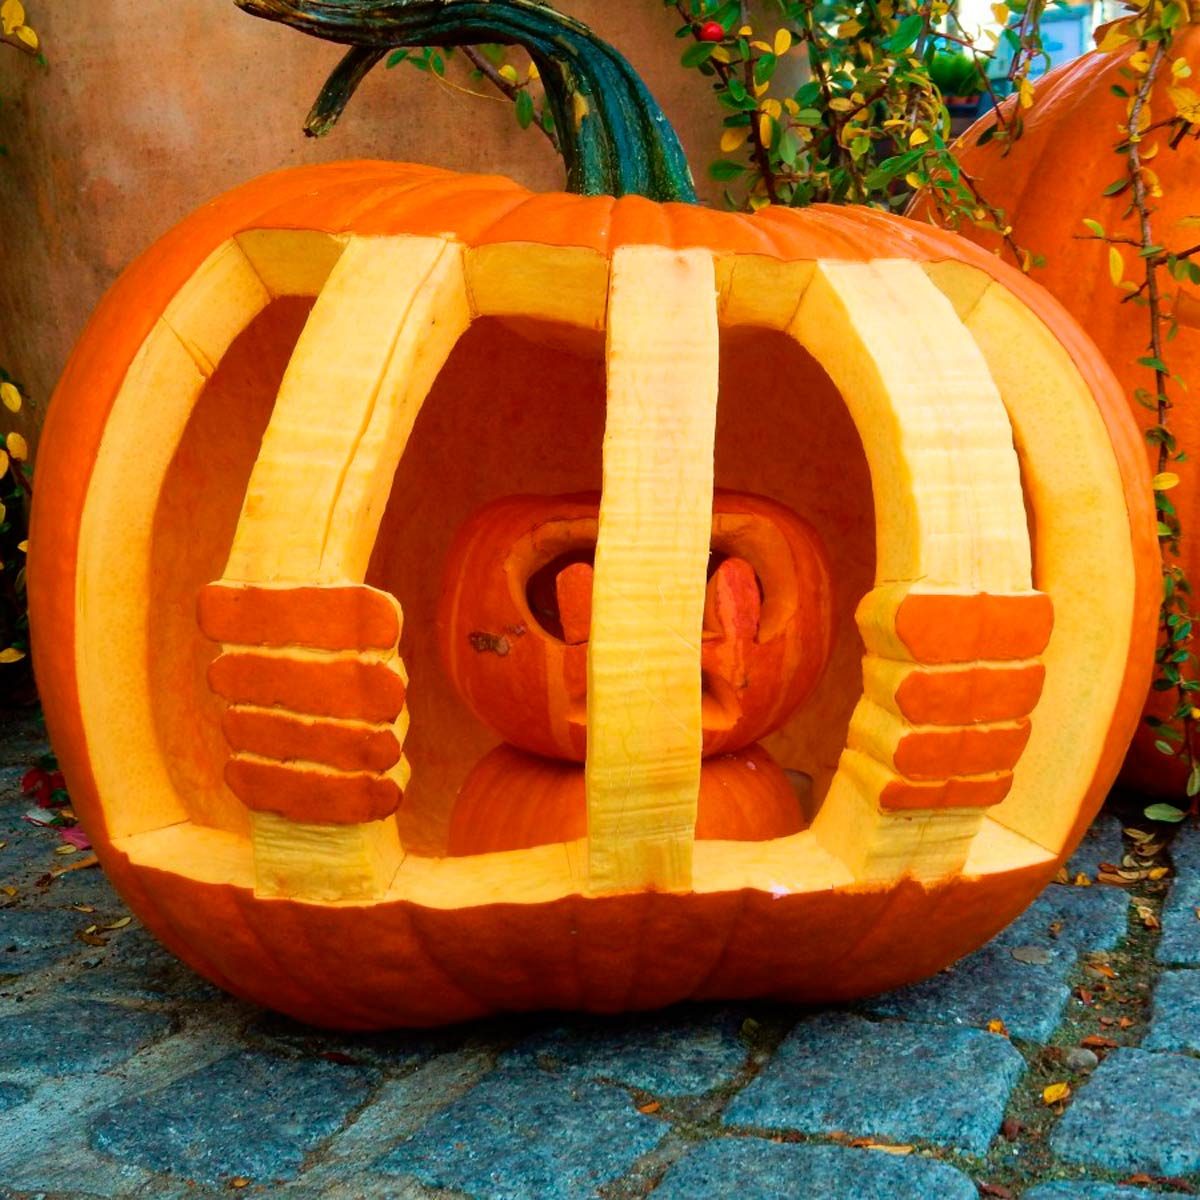 20-pumpkin-carving-ideas-to-inspire-you-this-halloween-reader-s-digest